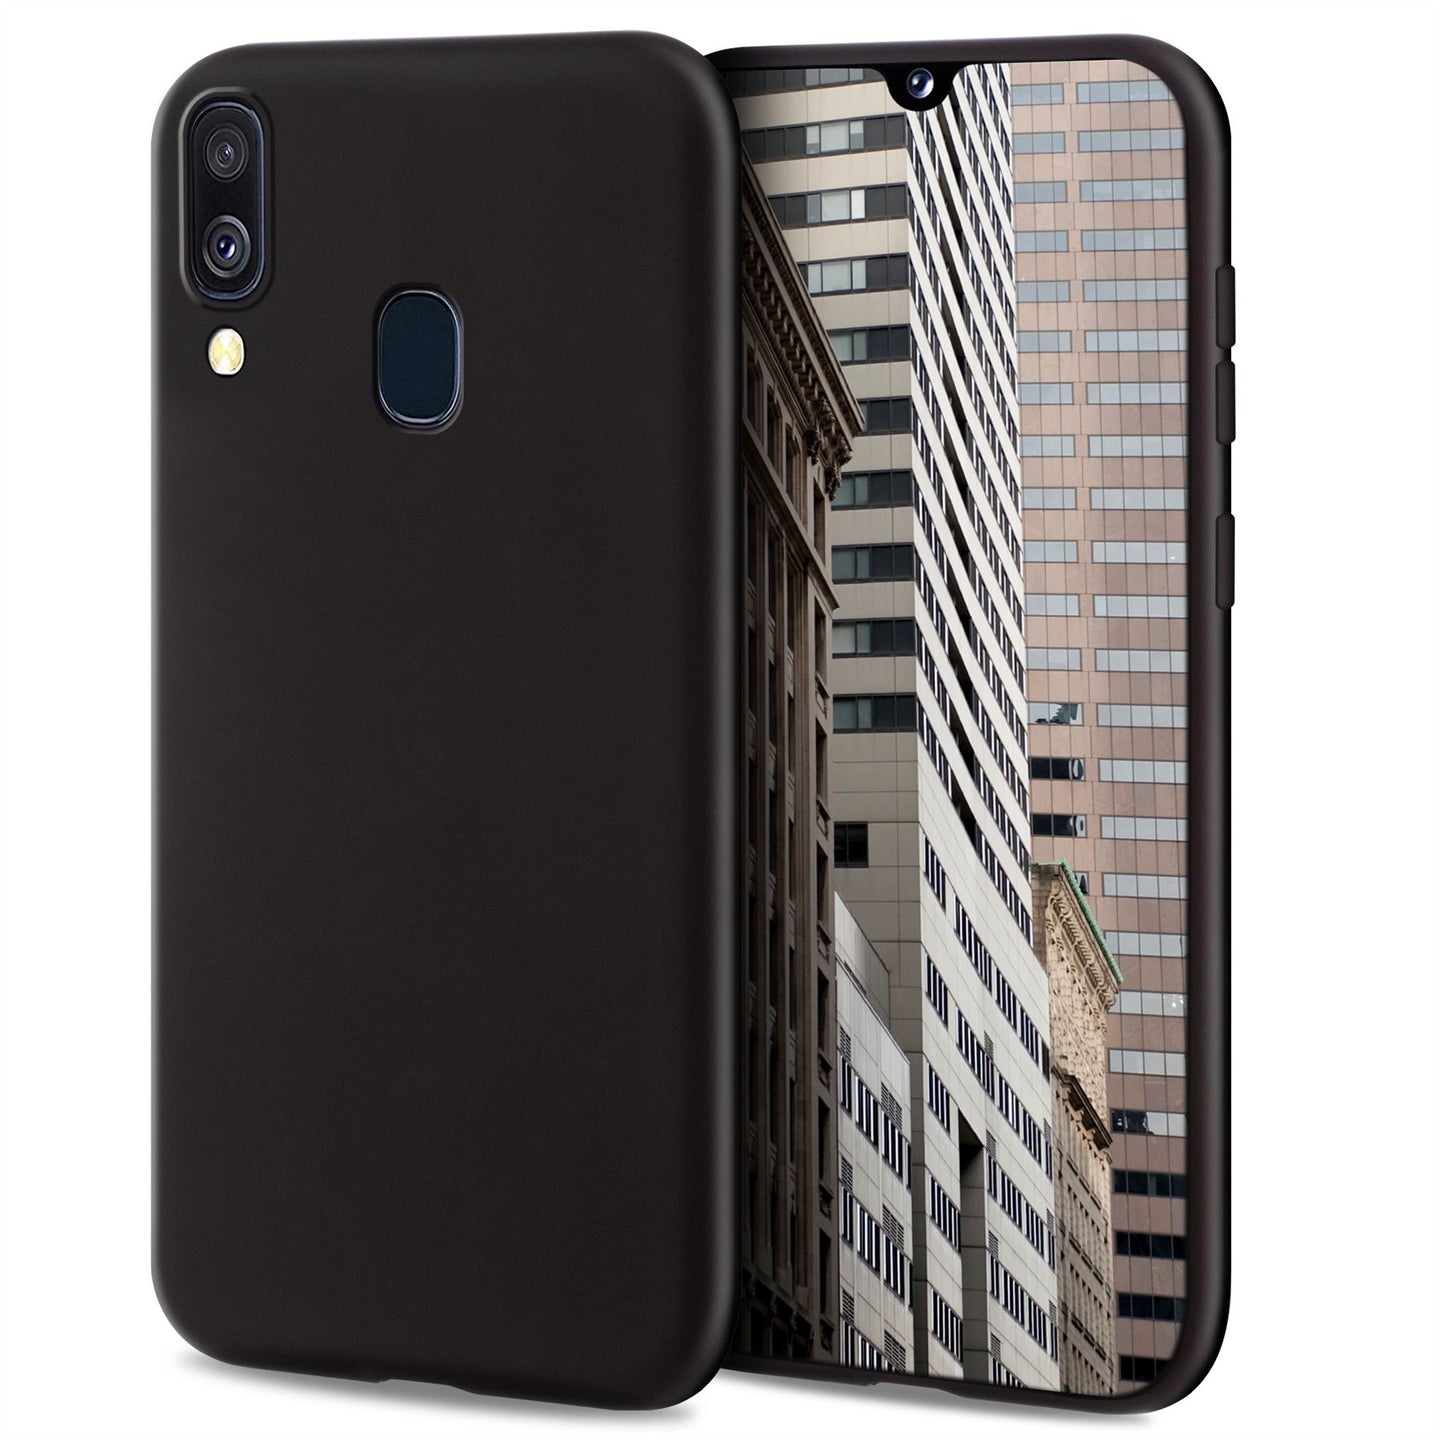 Moozy Lifestyle. Designed for Samsung A40 Case, Black - Liquid Silicone Cover with Matte Finish and Soft Microfiber Lining